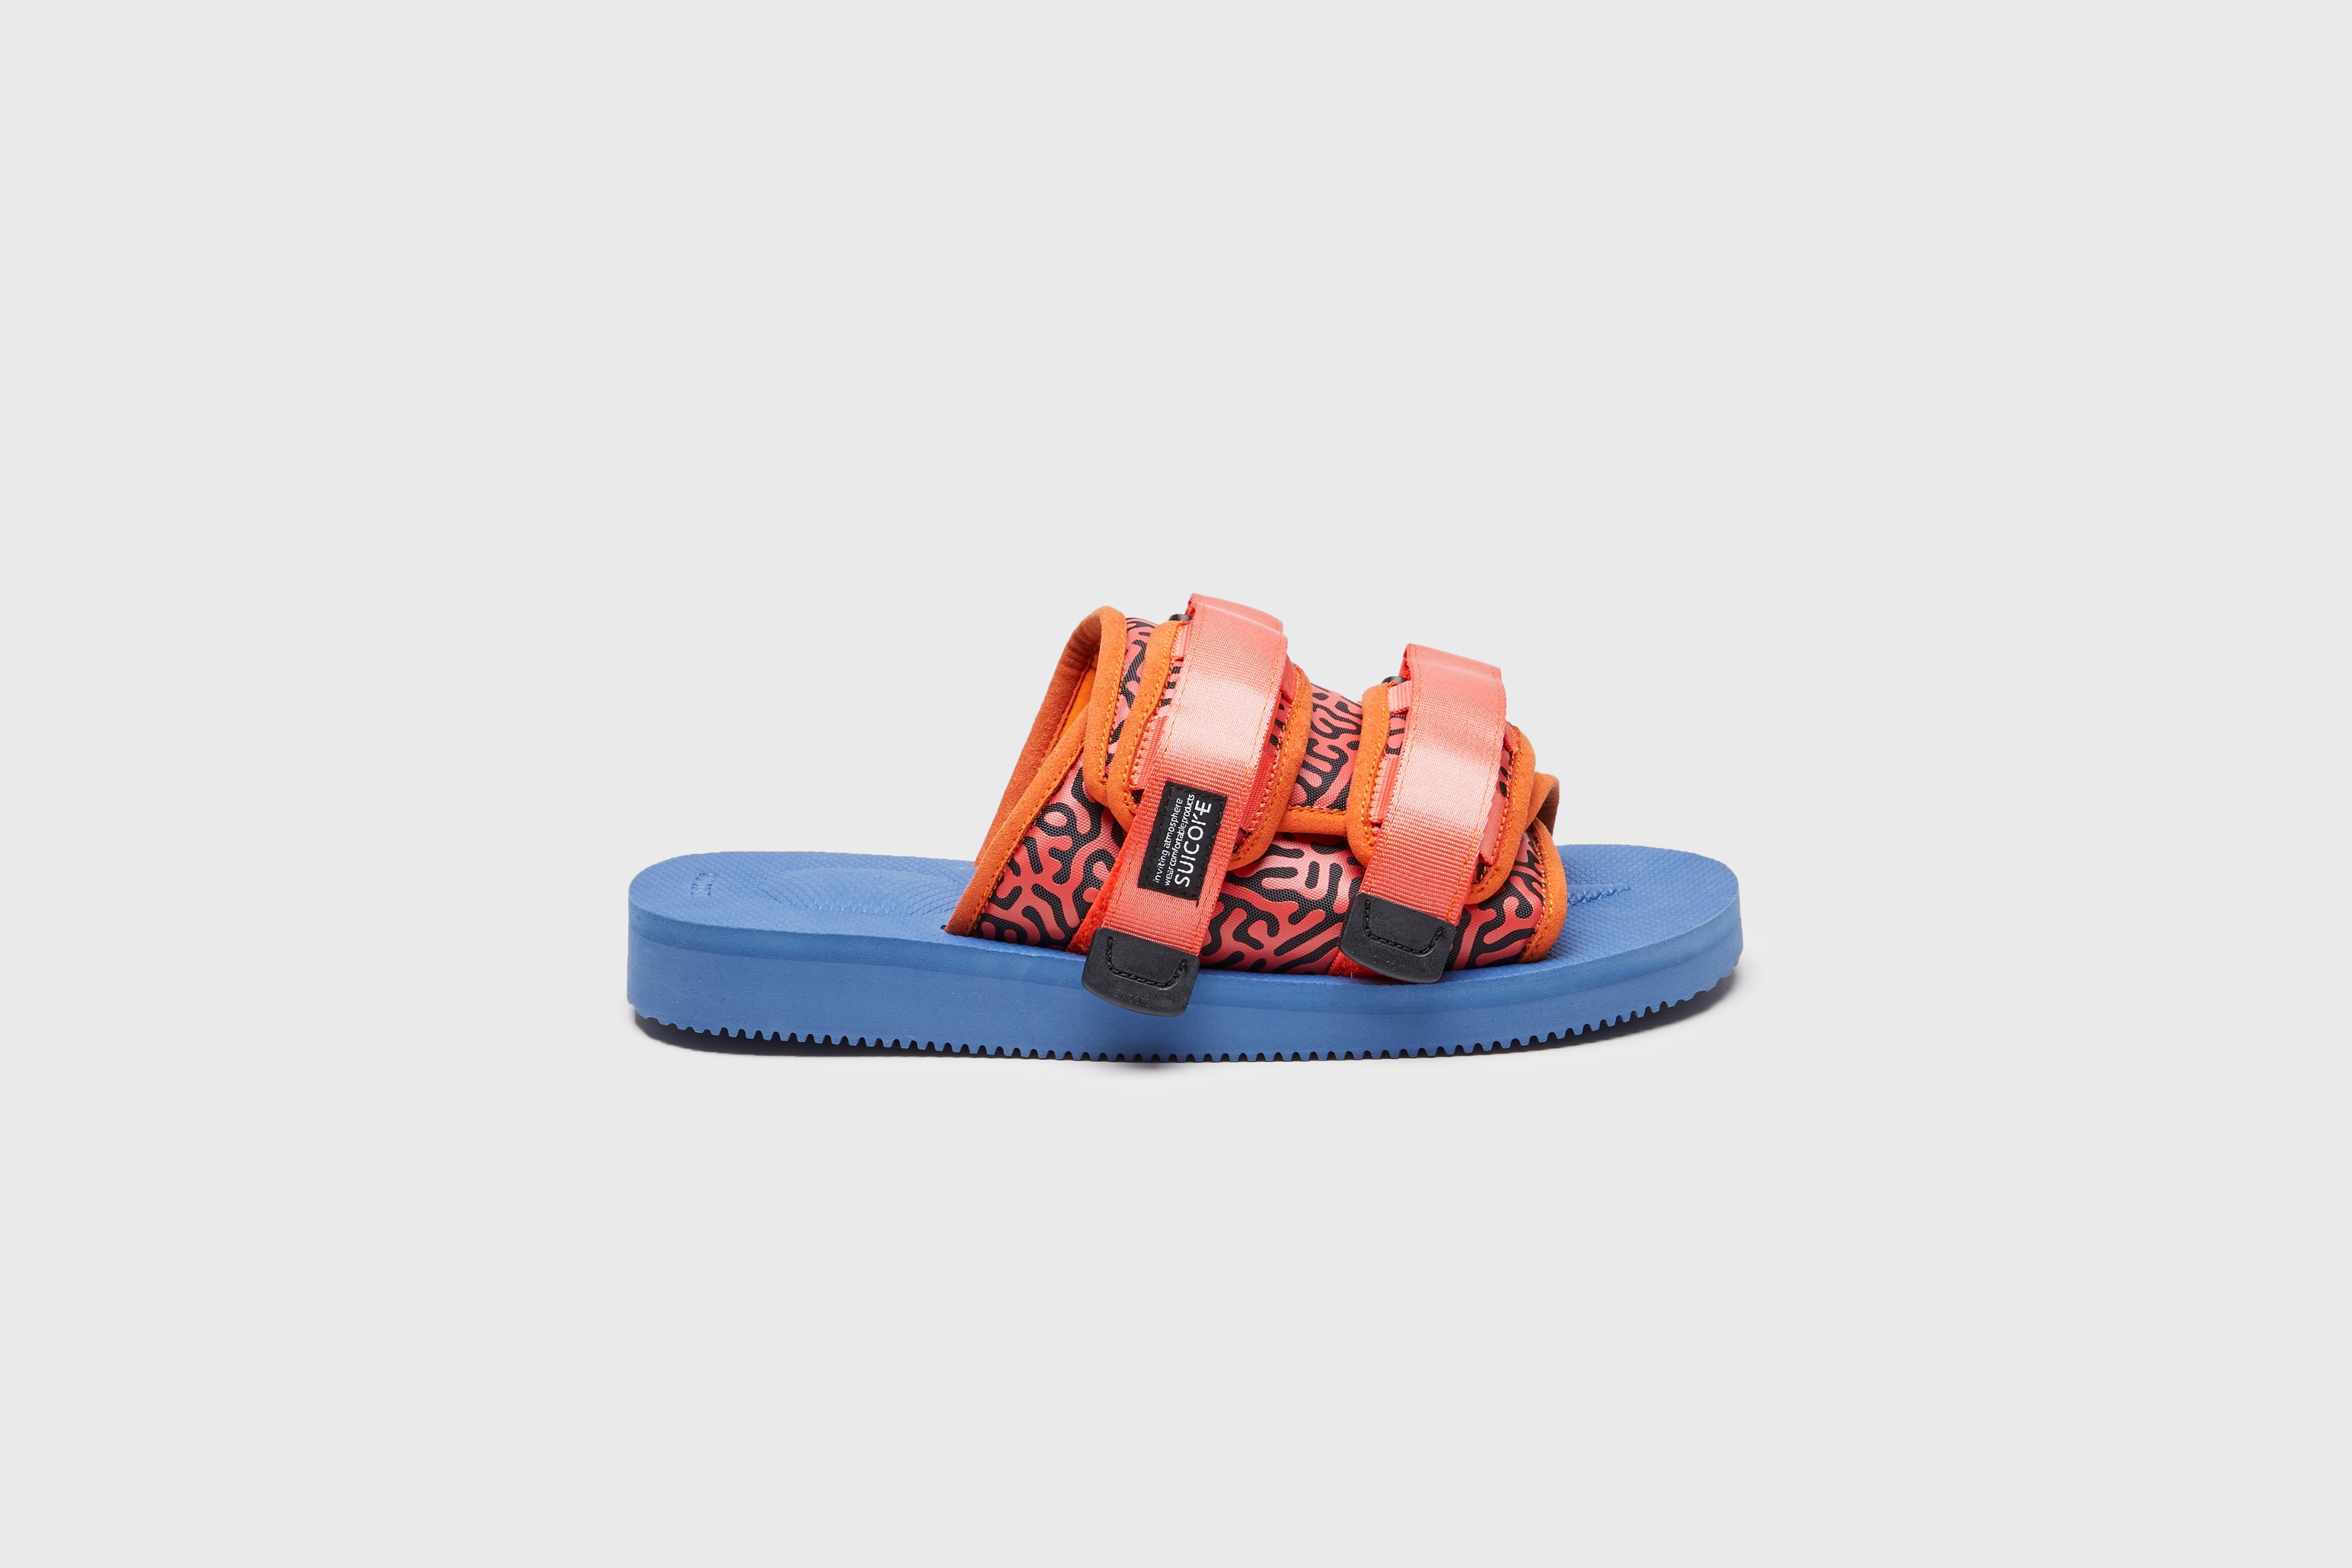 SUICOKE MOTO-Cab-PT06 slides with orange &amp; navy nylon upper, orange &amp; navy midsole and sole, strap and logo patch. From Spring/Summer 2023 collection on eightywingold Web Store, an official partner of SUICOKE. OG-056CAB-PT06 ORANGE X NAVY